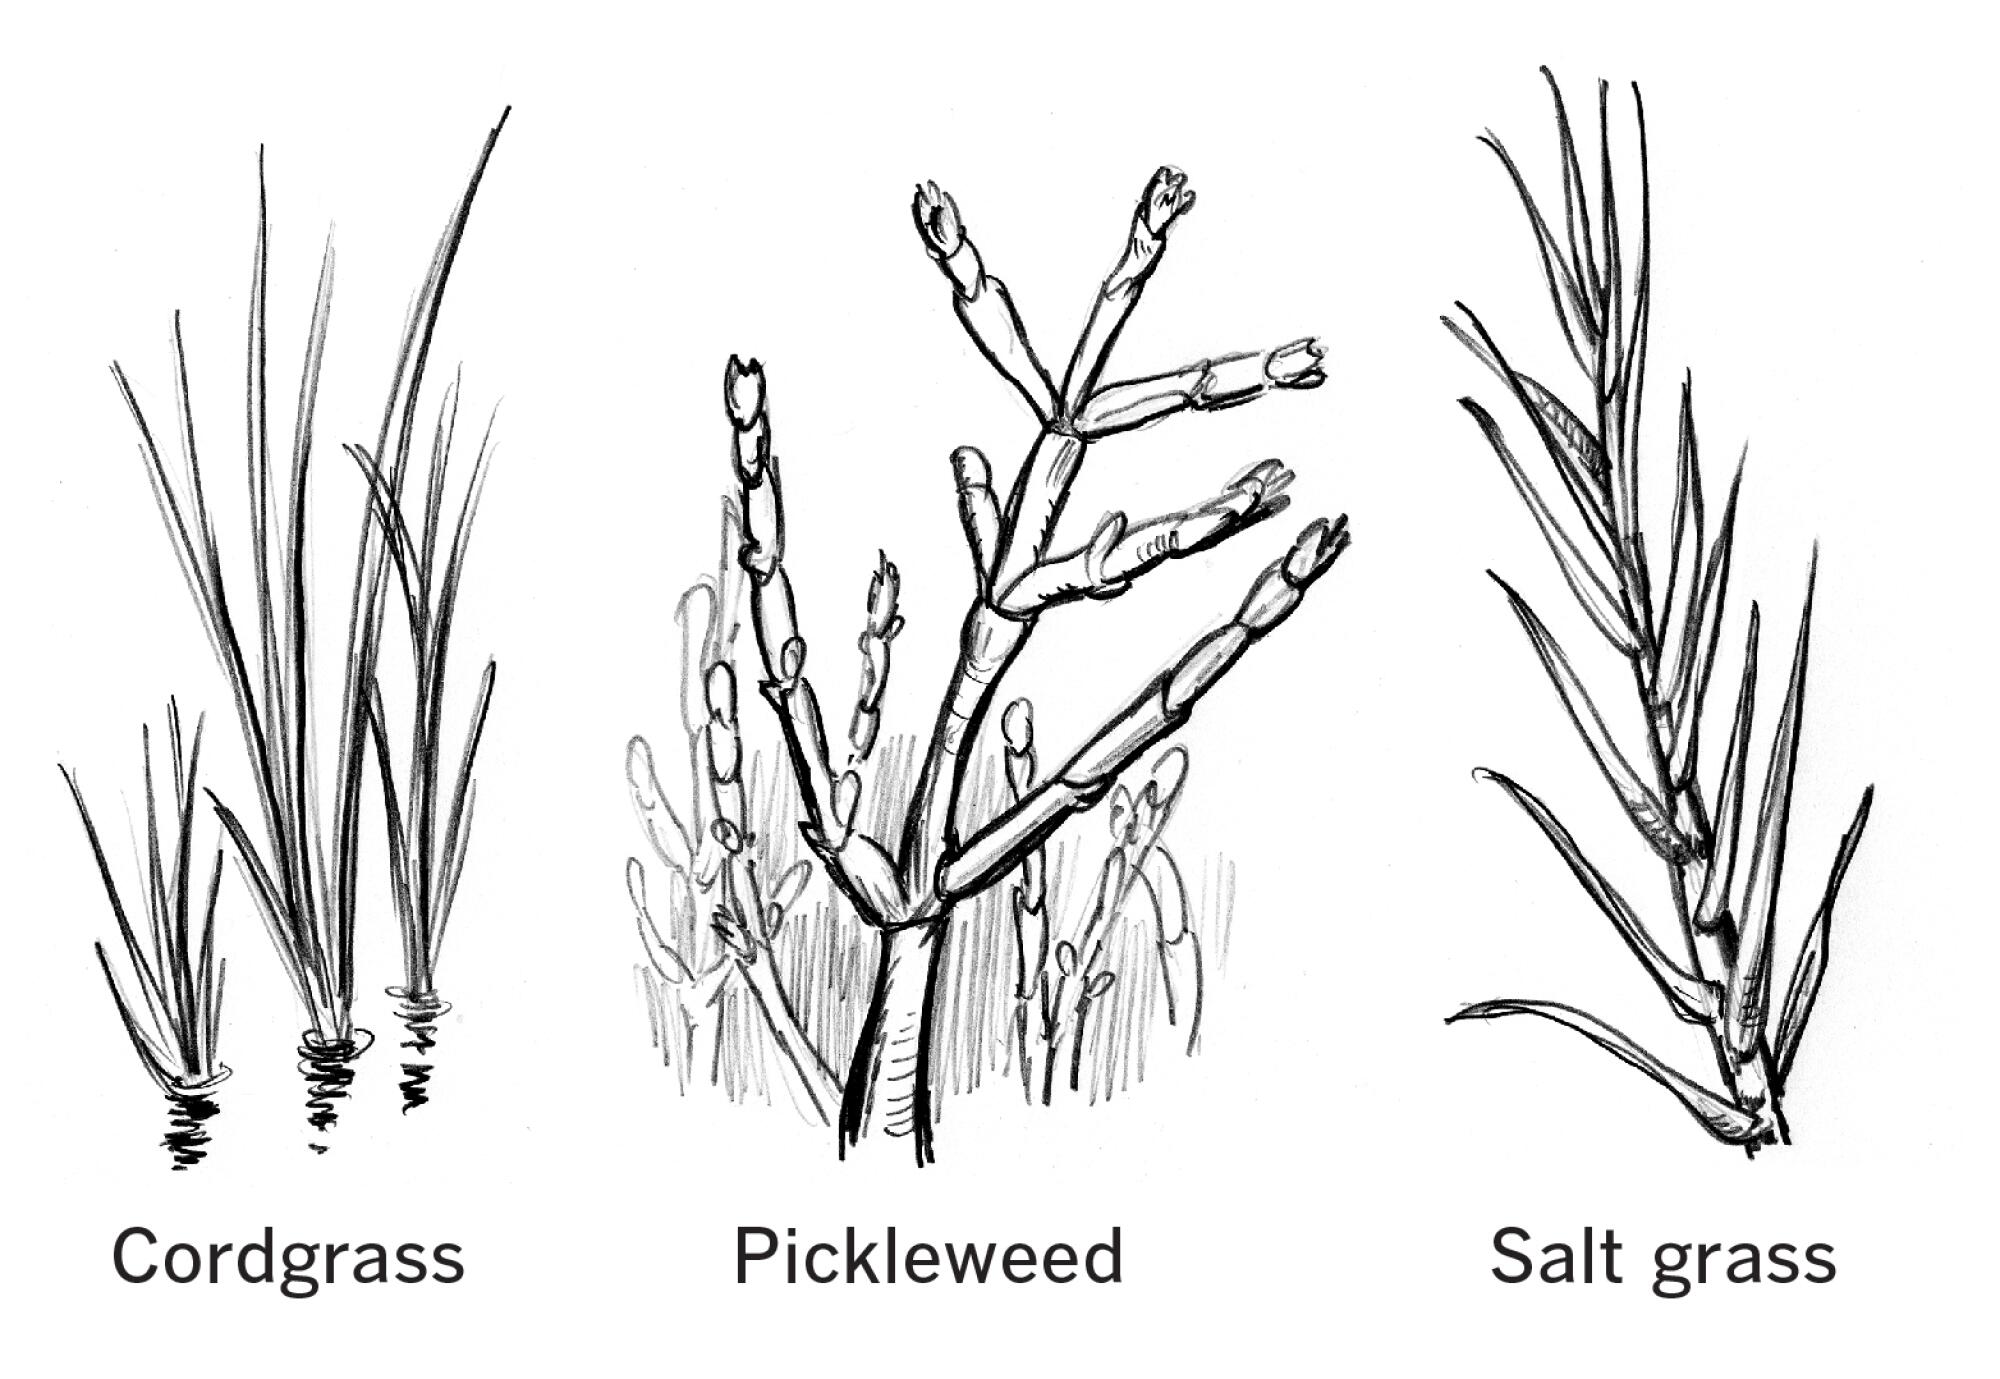 Marsh plants, including cordgrass, pickleweed and salt grass.